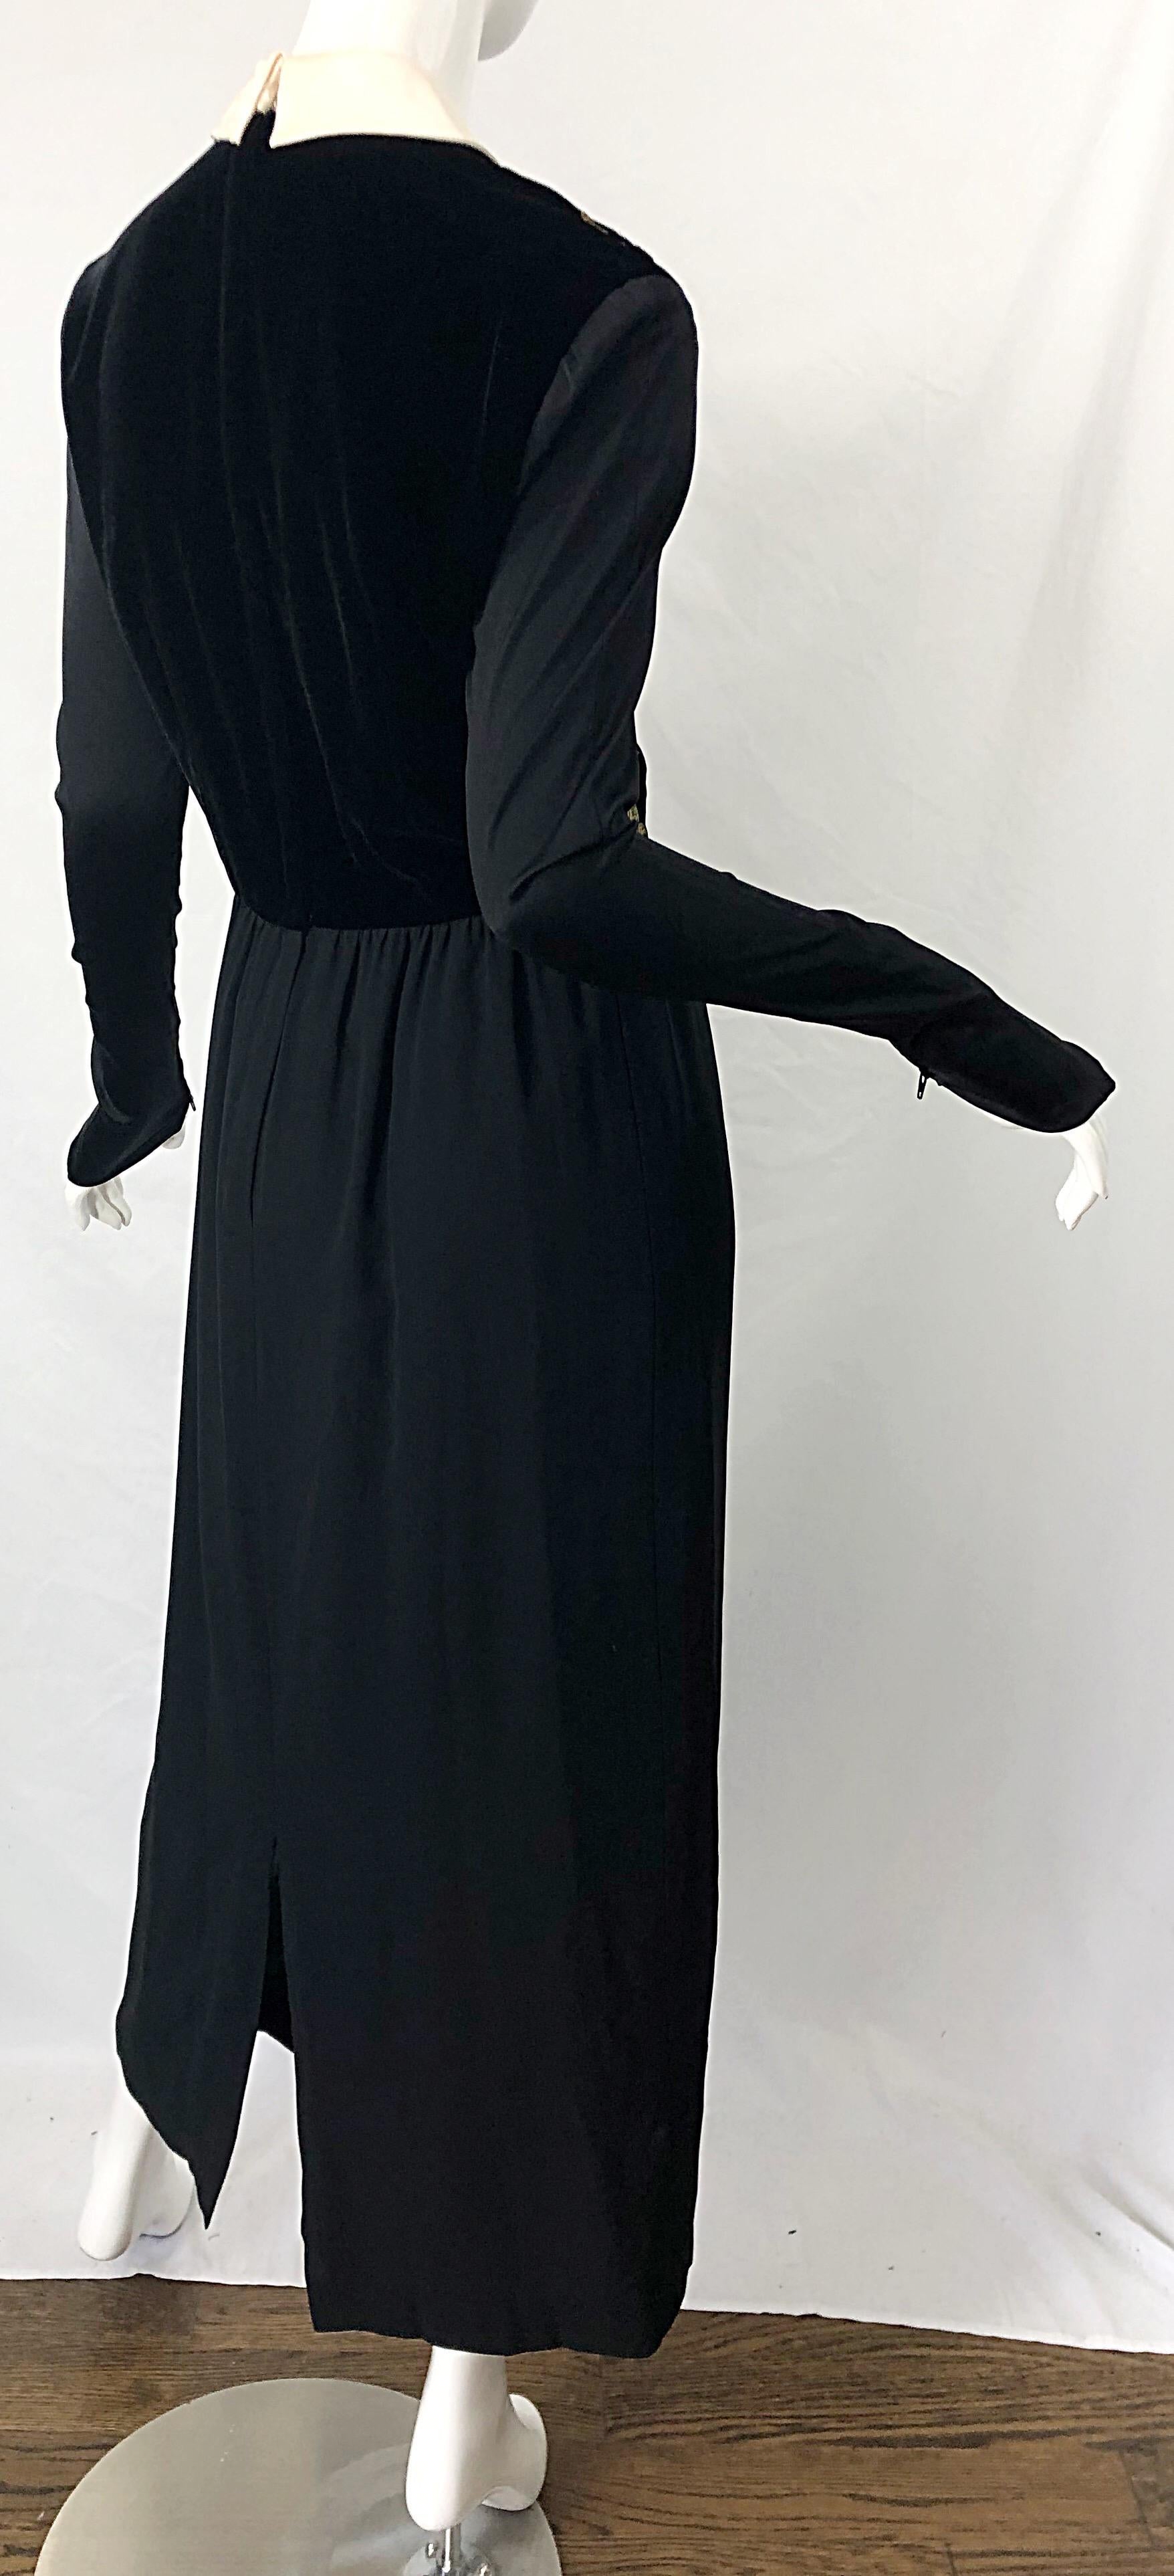 Karl Lagerfeld Runway Fall 1988 Black Gold Embroidered Vintage 80s Gown Dress For Sale 2